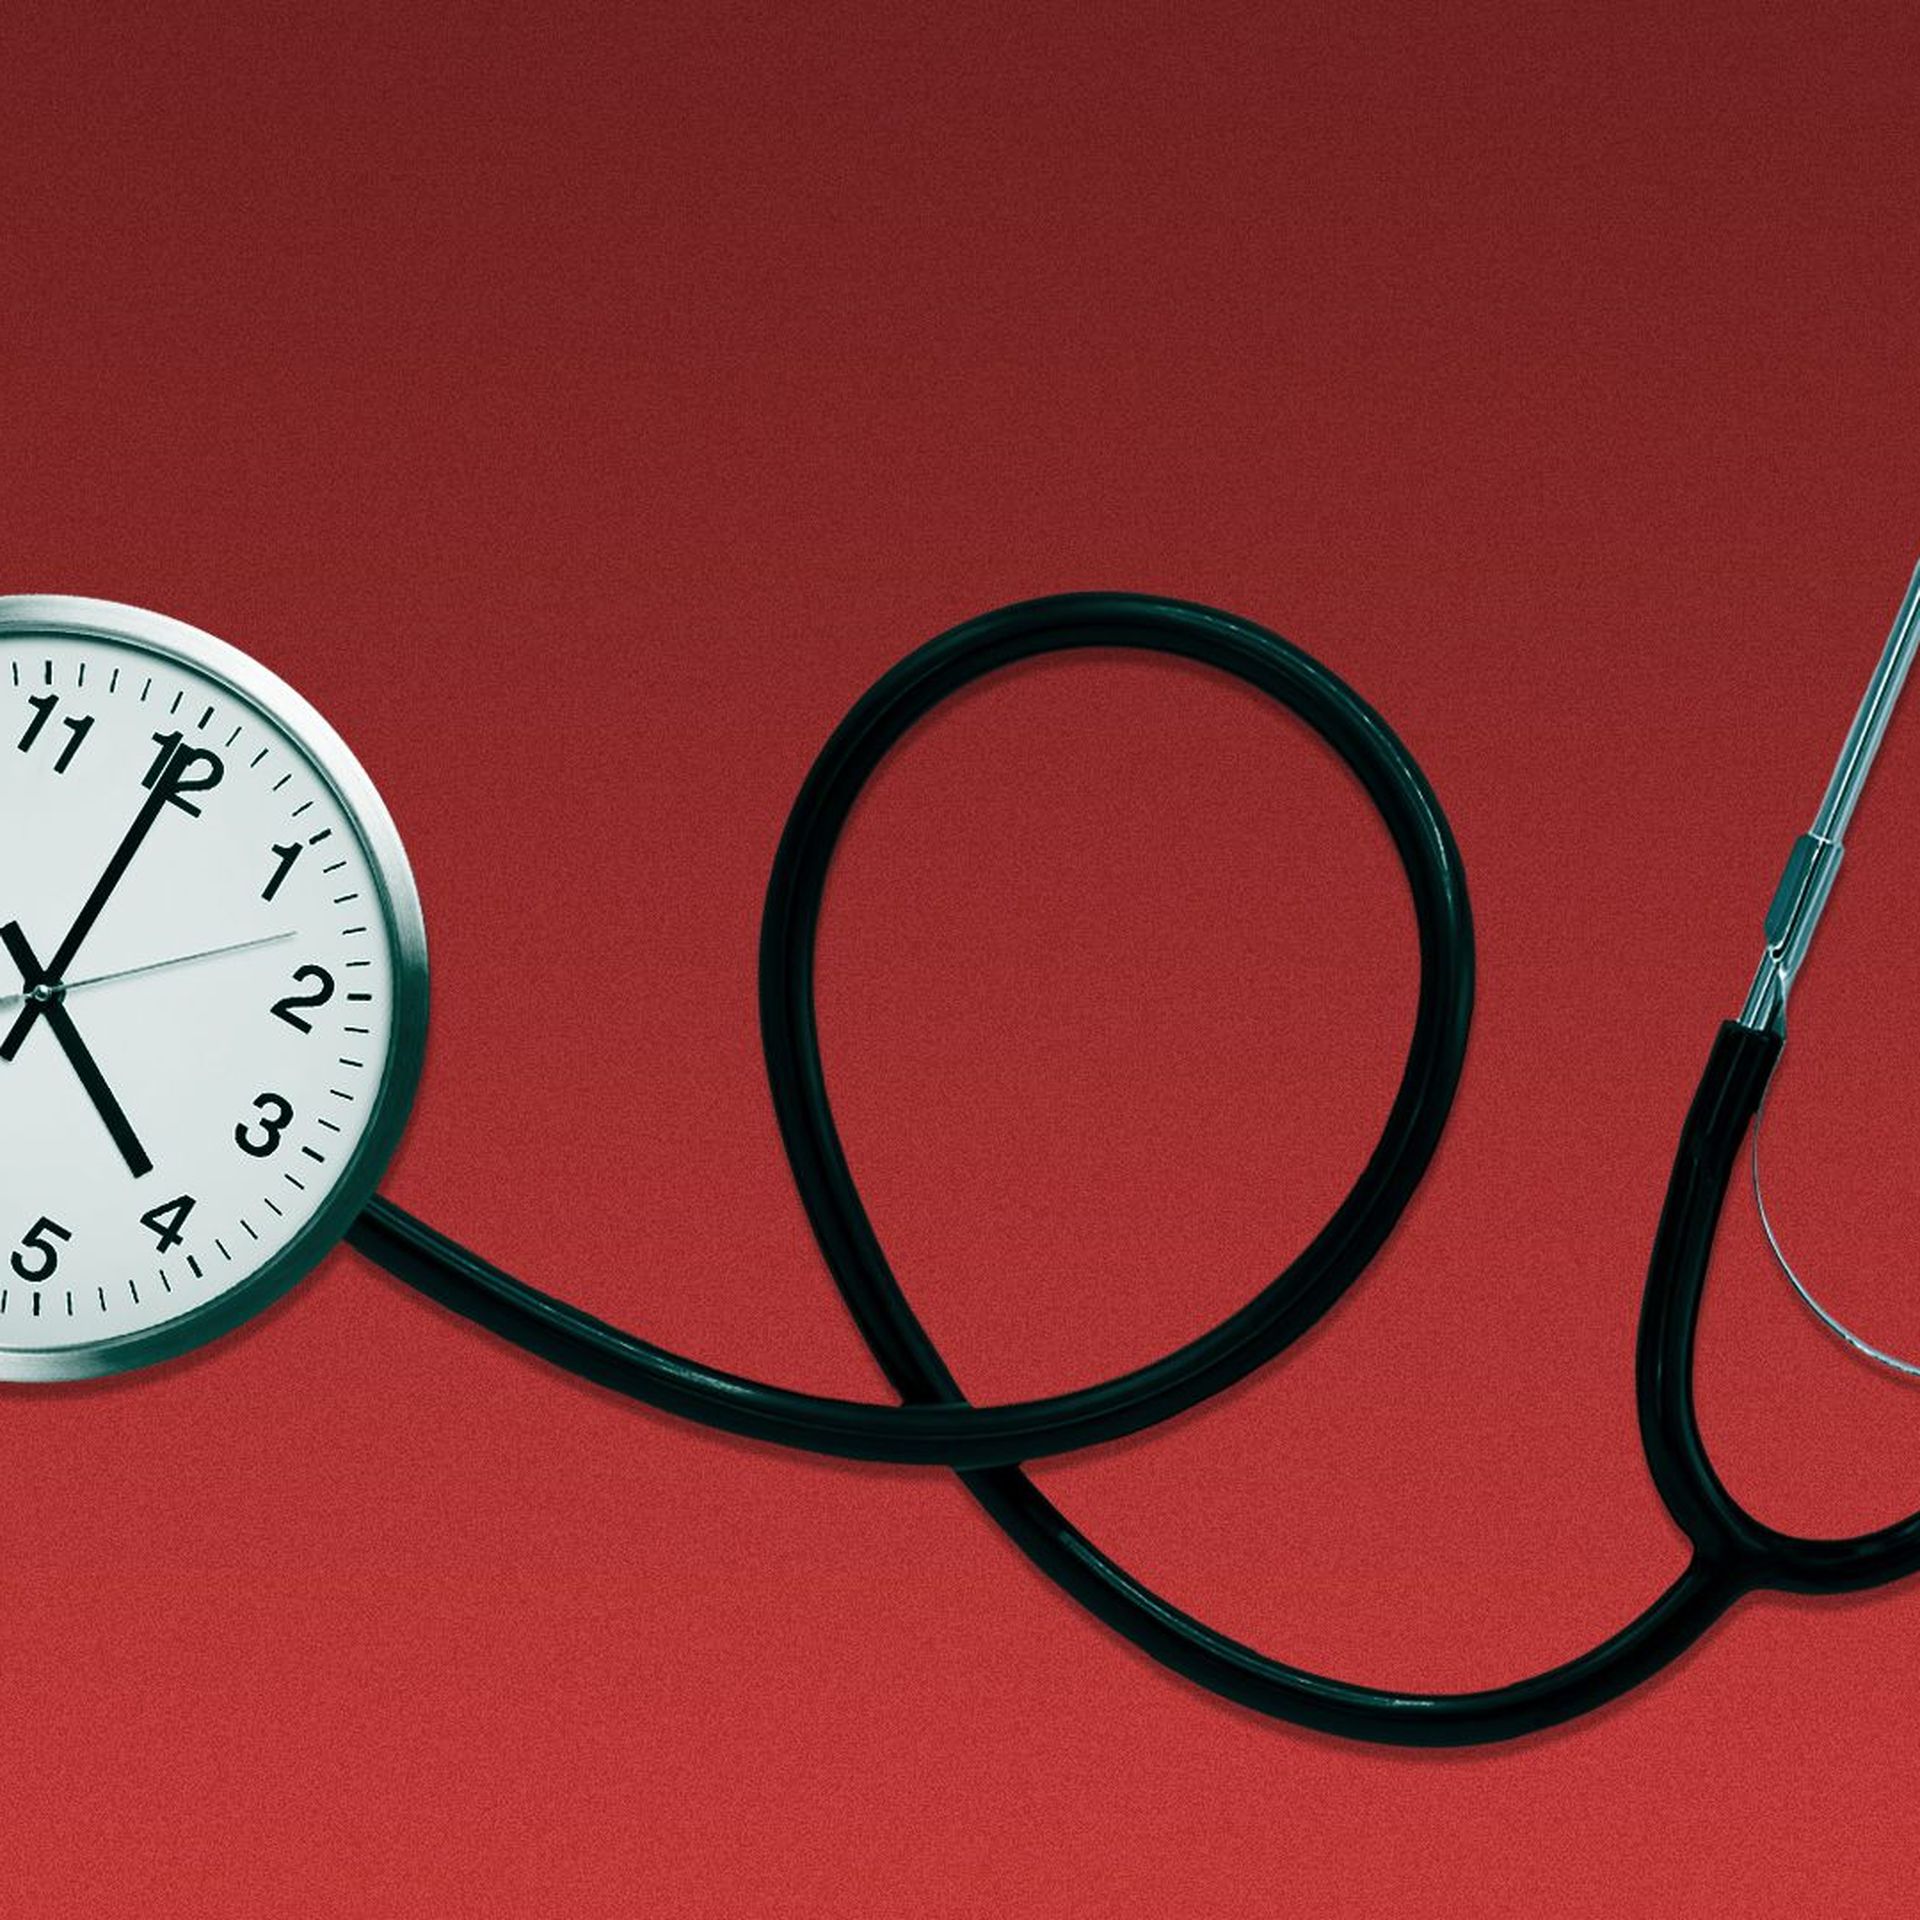 Illustration of a stethoscope with a clock attached.